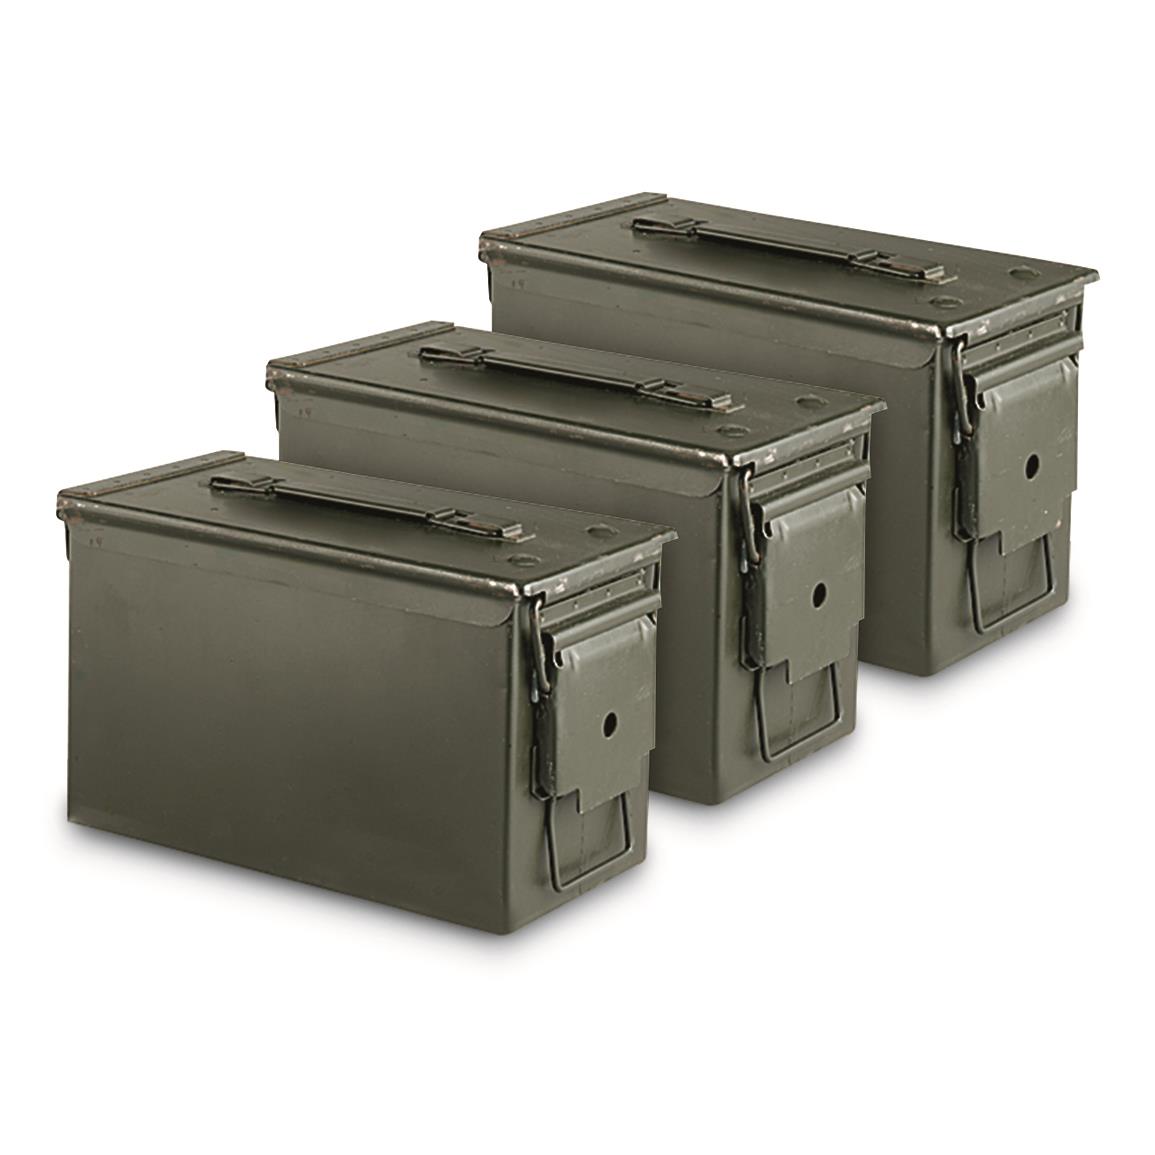 U.S. Military Surplus Waterproof M2A1 .50 Caliber Ammo Can, 3 Pack, Used